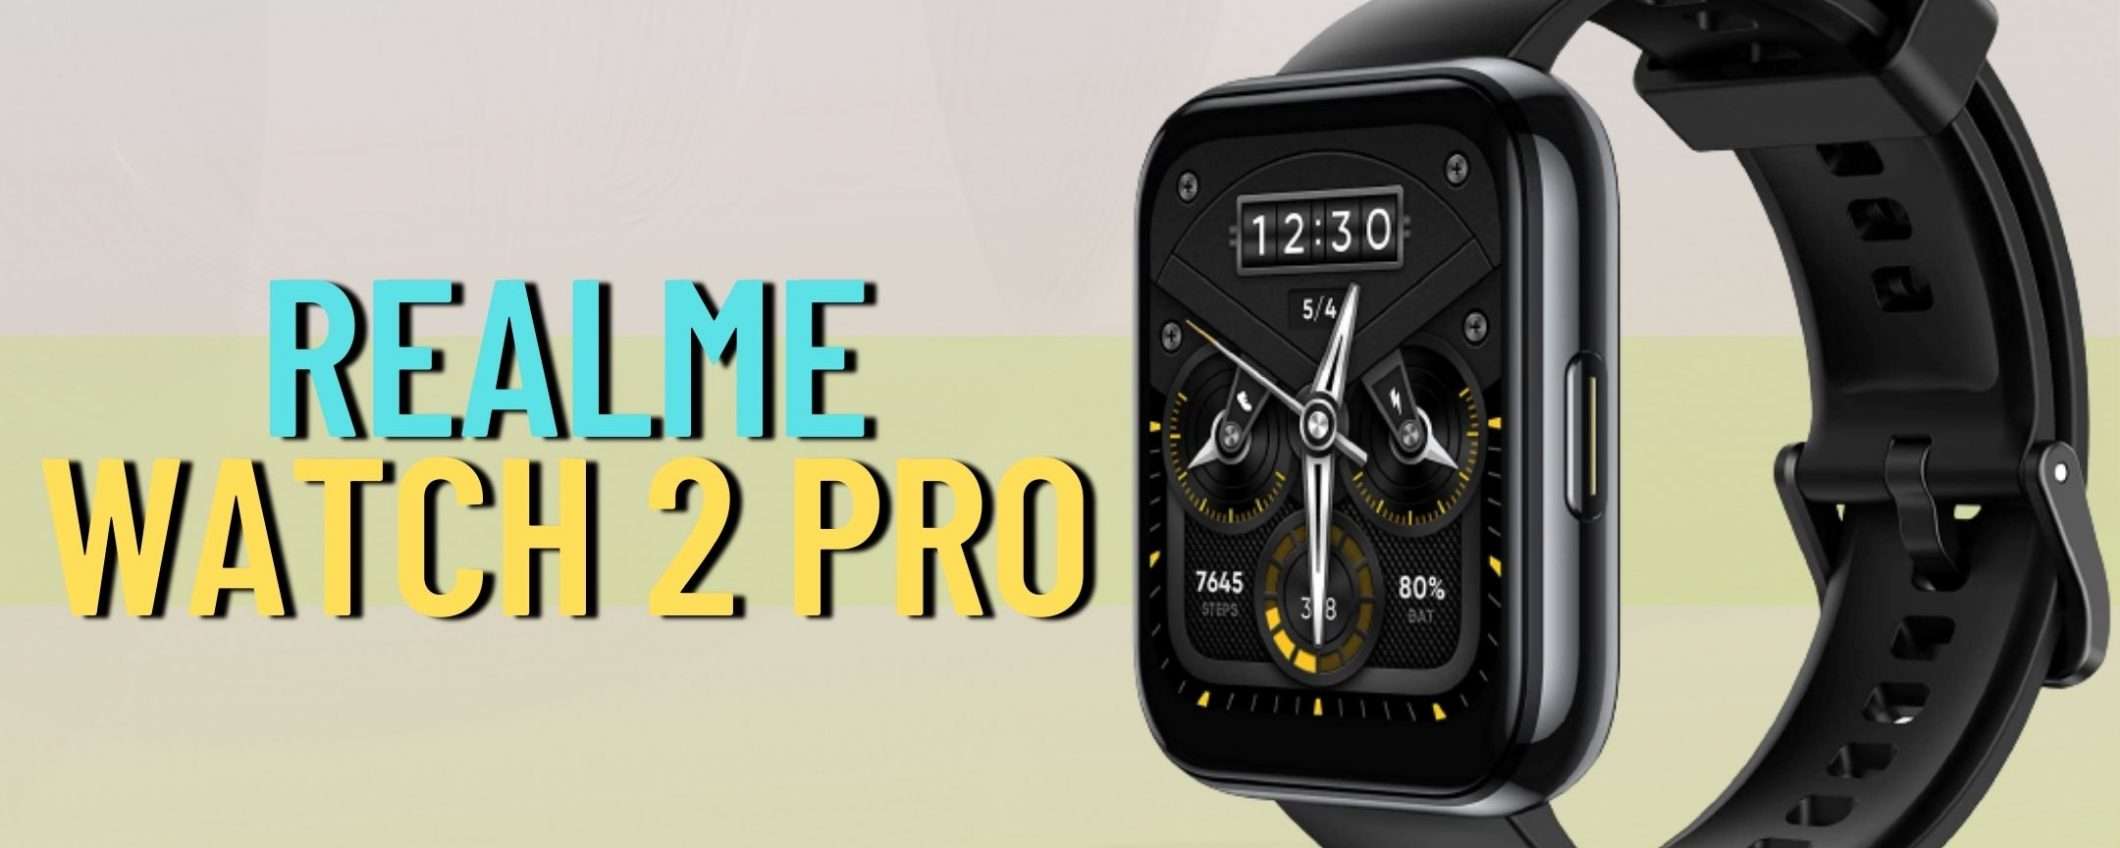 Realme Watch 2 Pro in preordine con coupon WOW